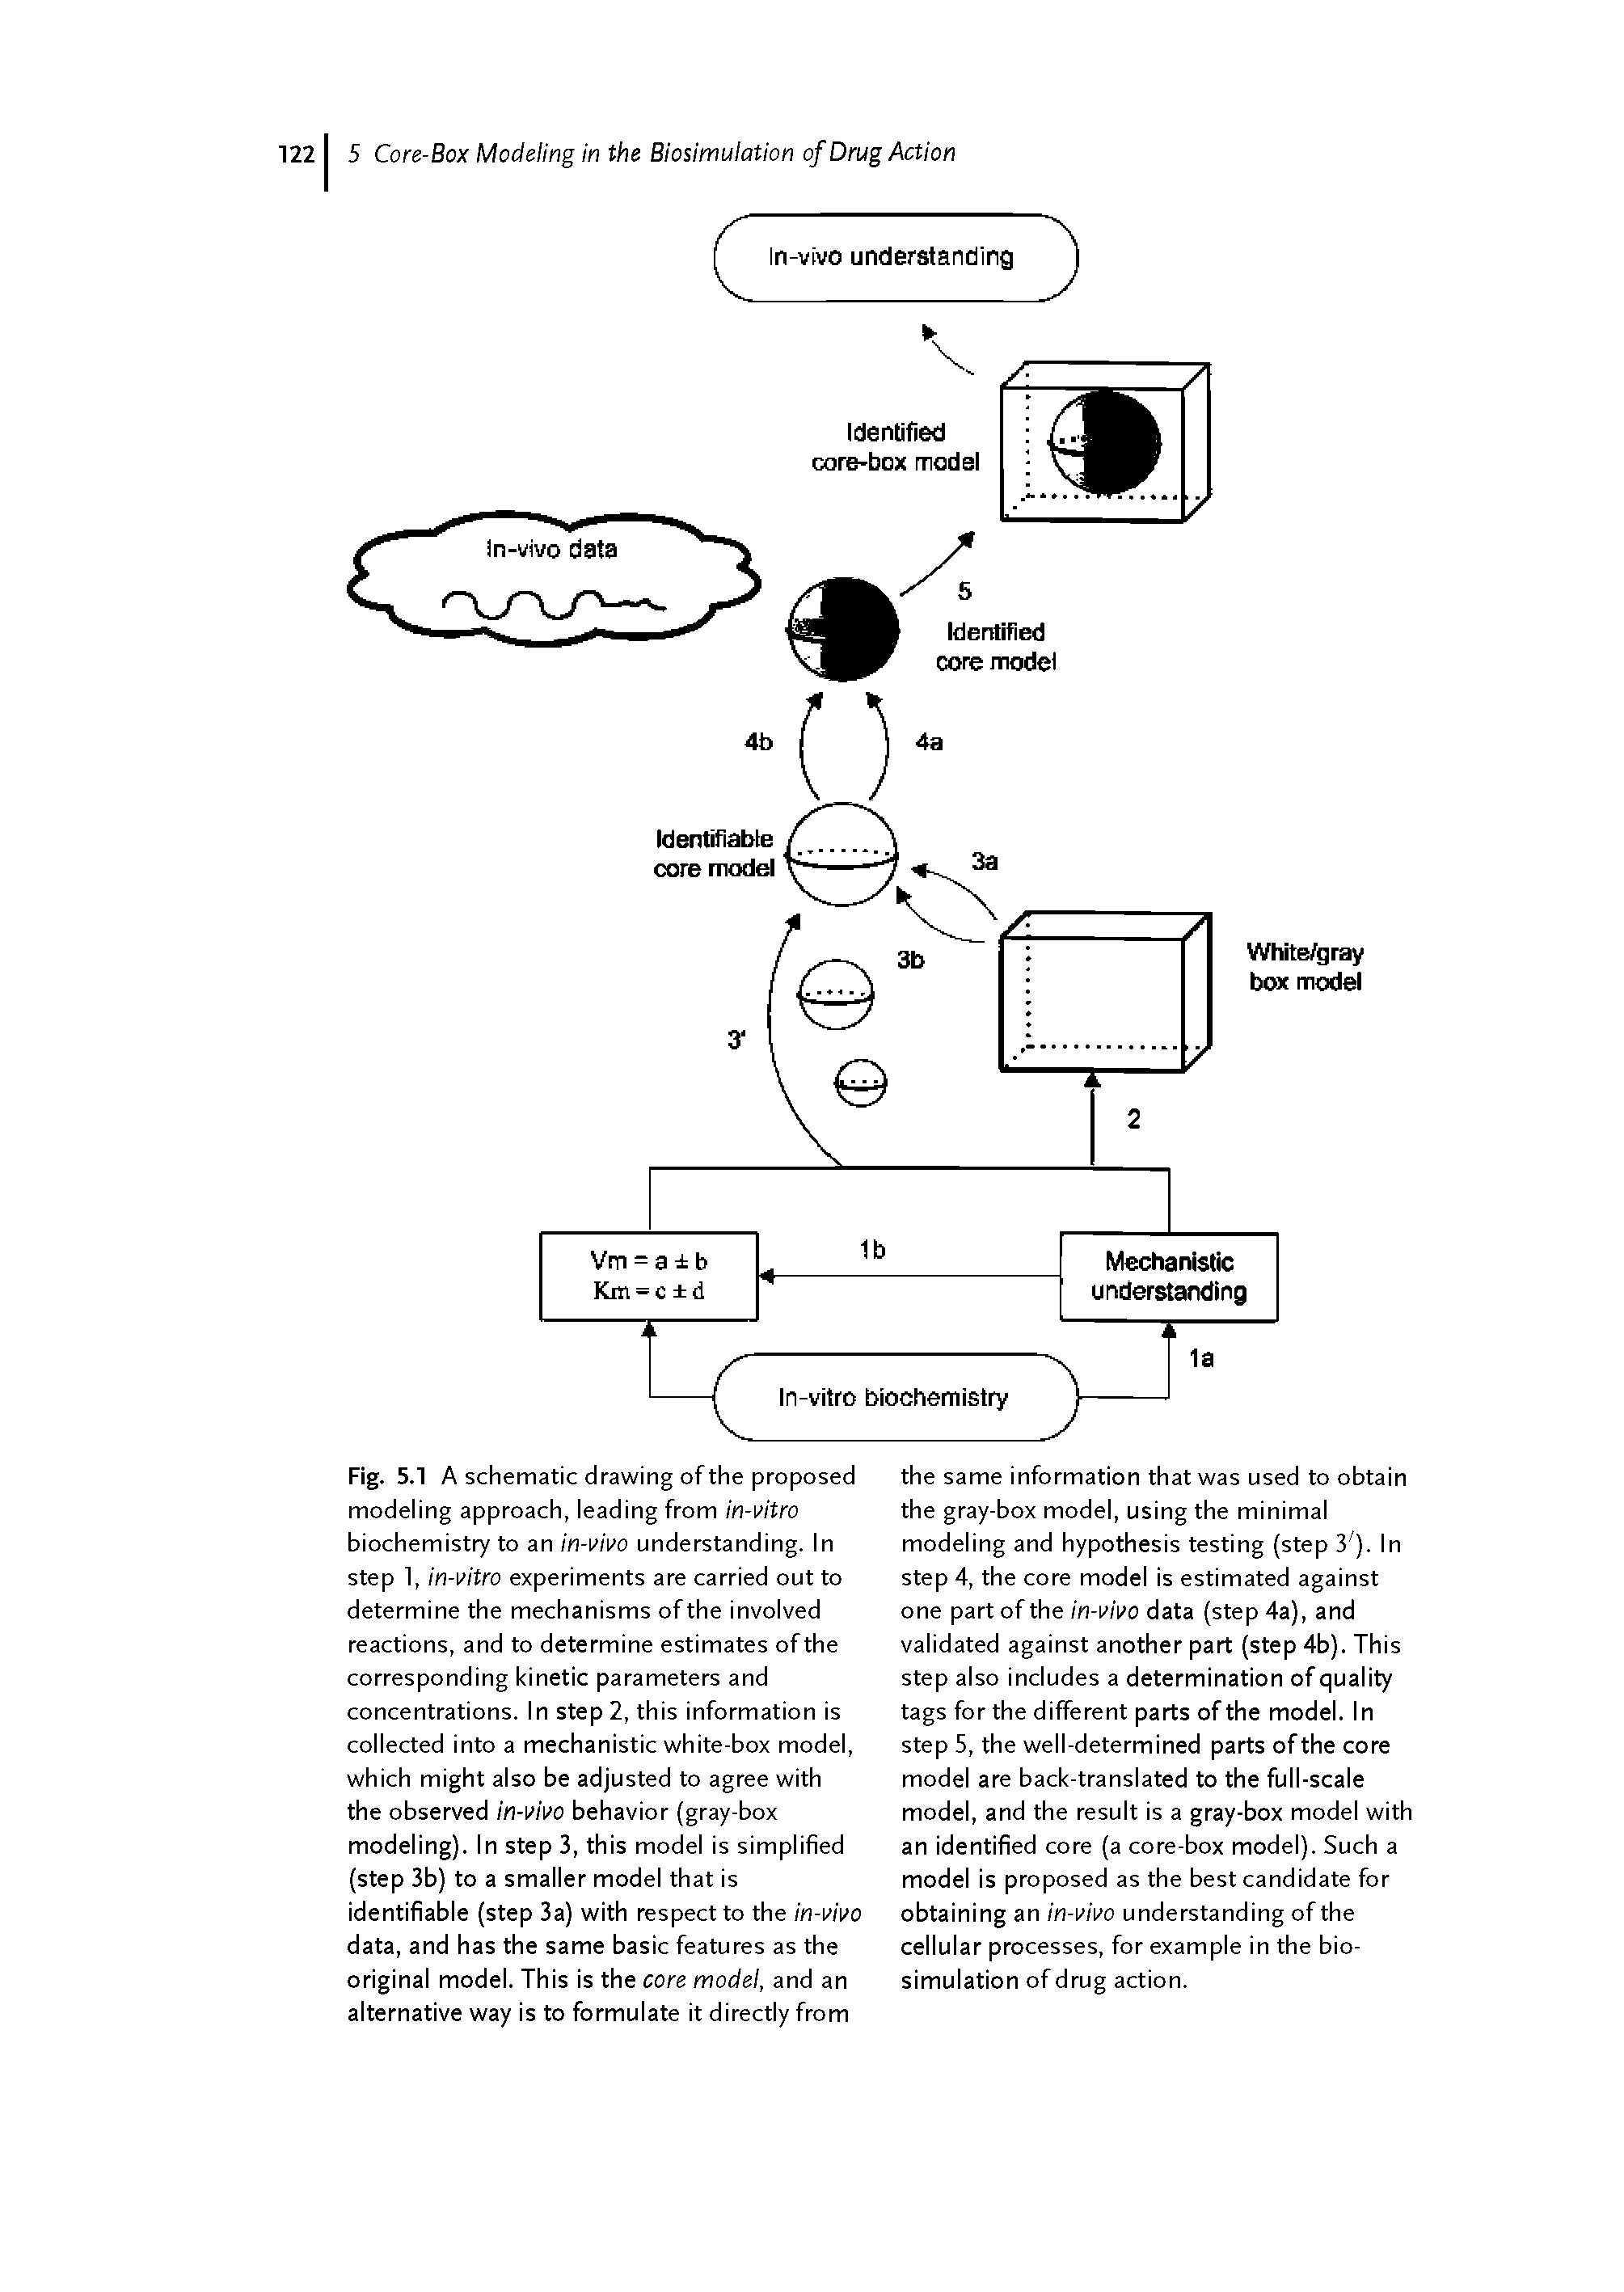 Fig. 5.1 A schematic drawing of the proposed modeling approach, leading from in-vitro biochemistry to an in-vivo understanding. In step 1, in-vitro experiments are carried out to determine the mechanisms of the involved reactions, and to determine estimates of the corresponding kinetic parameters and concentrations. In step 2, this information is collected into a mechanistic white-box model, which might also be adjusted to agree with the observed in-vivo behavior (gray-box modeling). In step 3, this model is simplified (step 3b) to a smaller model that is identifiable (step 3a) with respect to the in-vivo data, and has the same basic features as the original model. This is the core model, and an alternative way is to formulate it directly from...